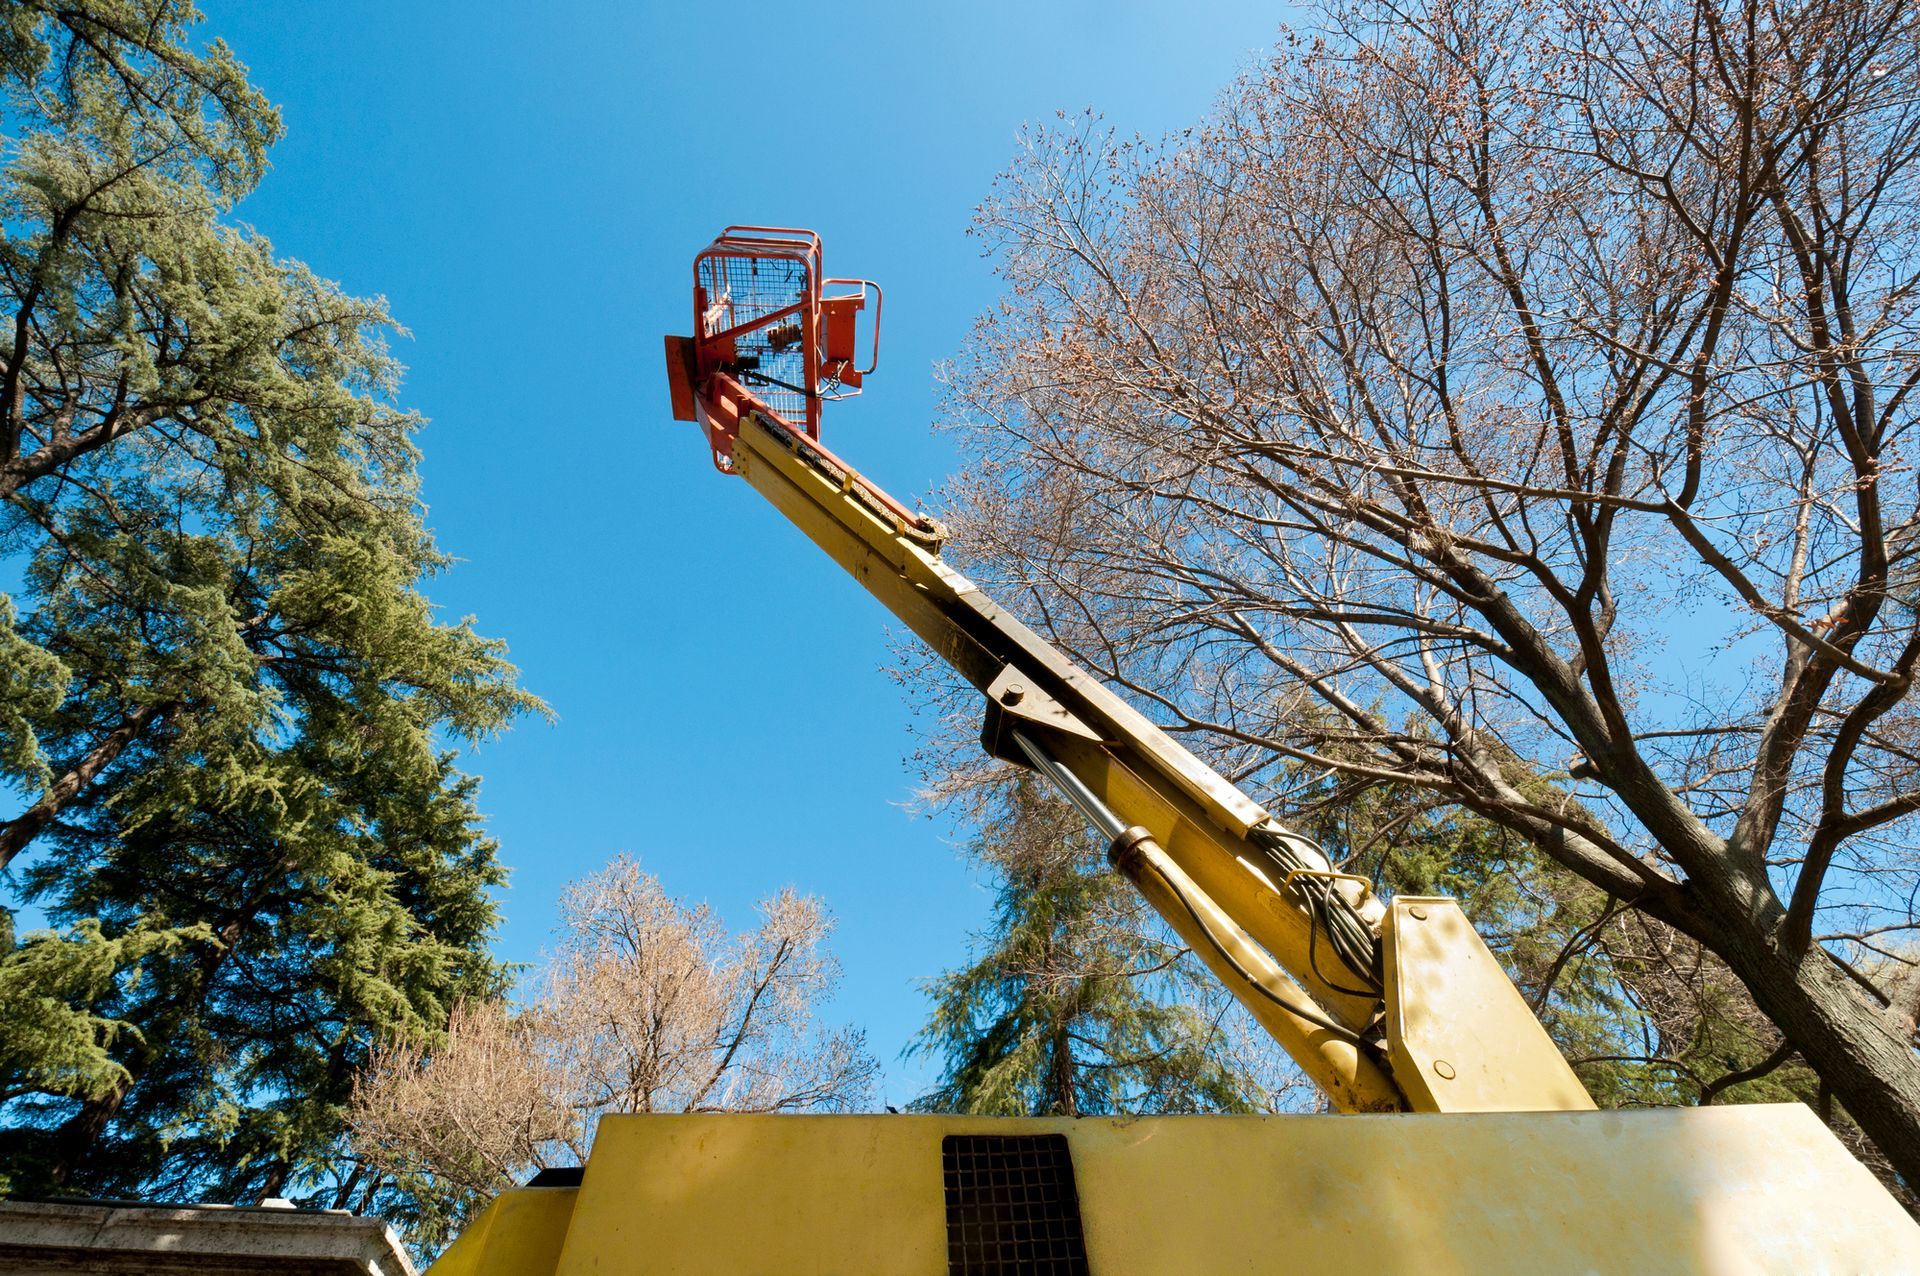 a yellow crane is lifting a tree in a park .